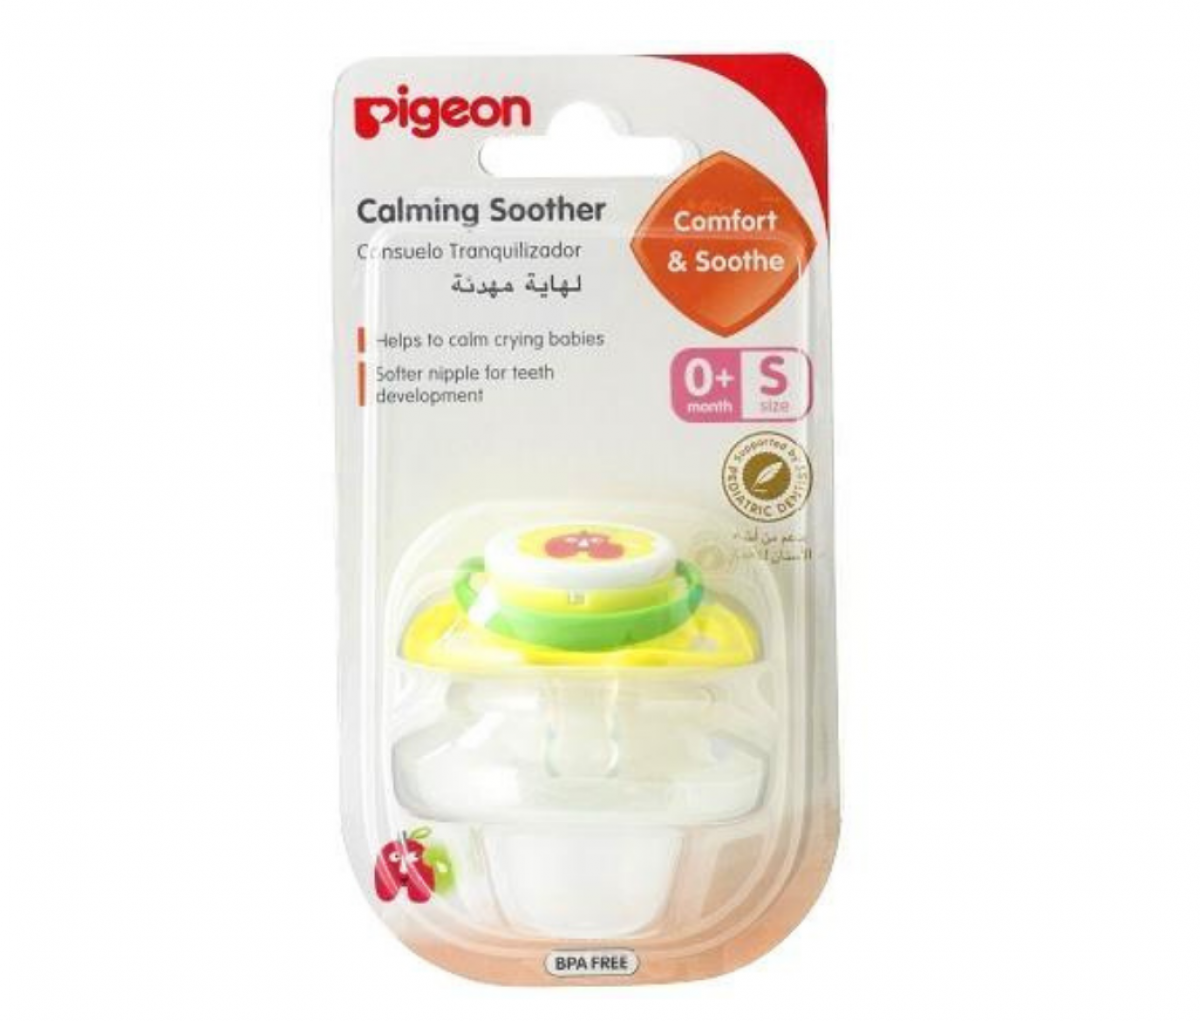 Calming Soother (S) Size Apple, (ENG/SPN), Blister Pack [26061E]